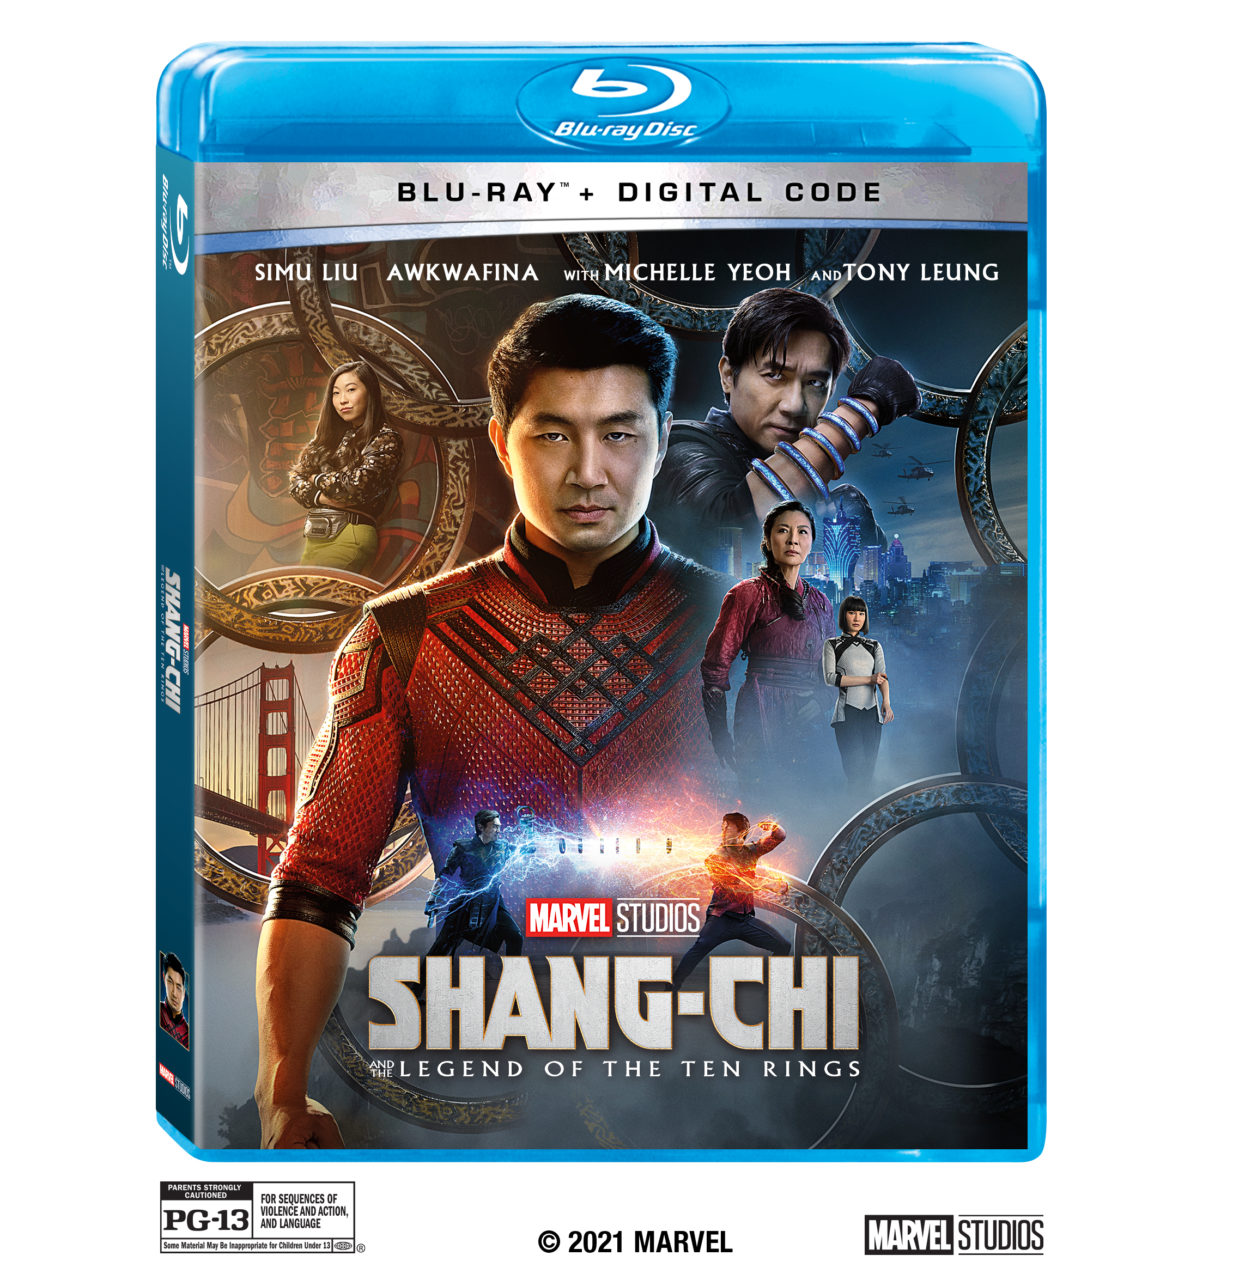 Shang-Chi And The Legend Of The Ten Rings Blu-Ray Combo Pack cover (Marvel Studios/Walt Disney Studios Home Entertainment)